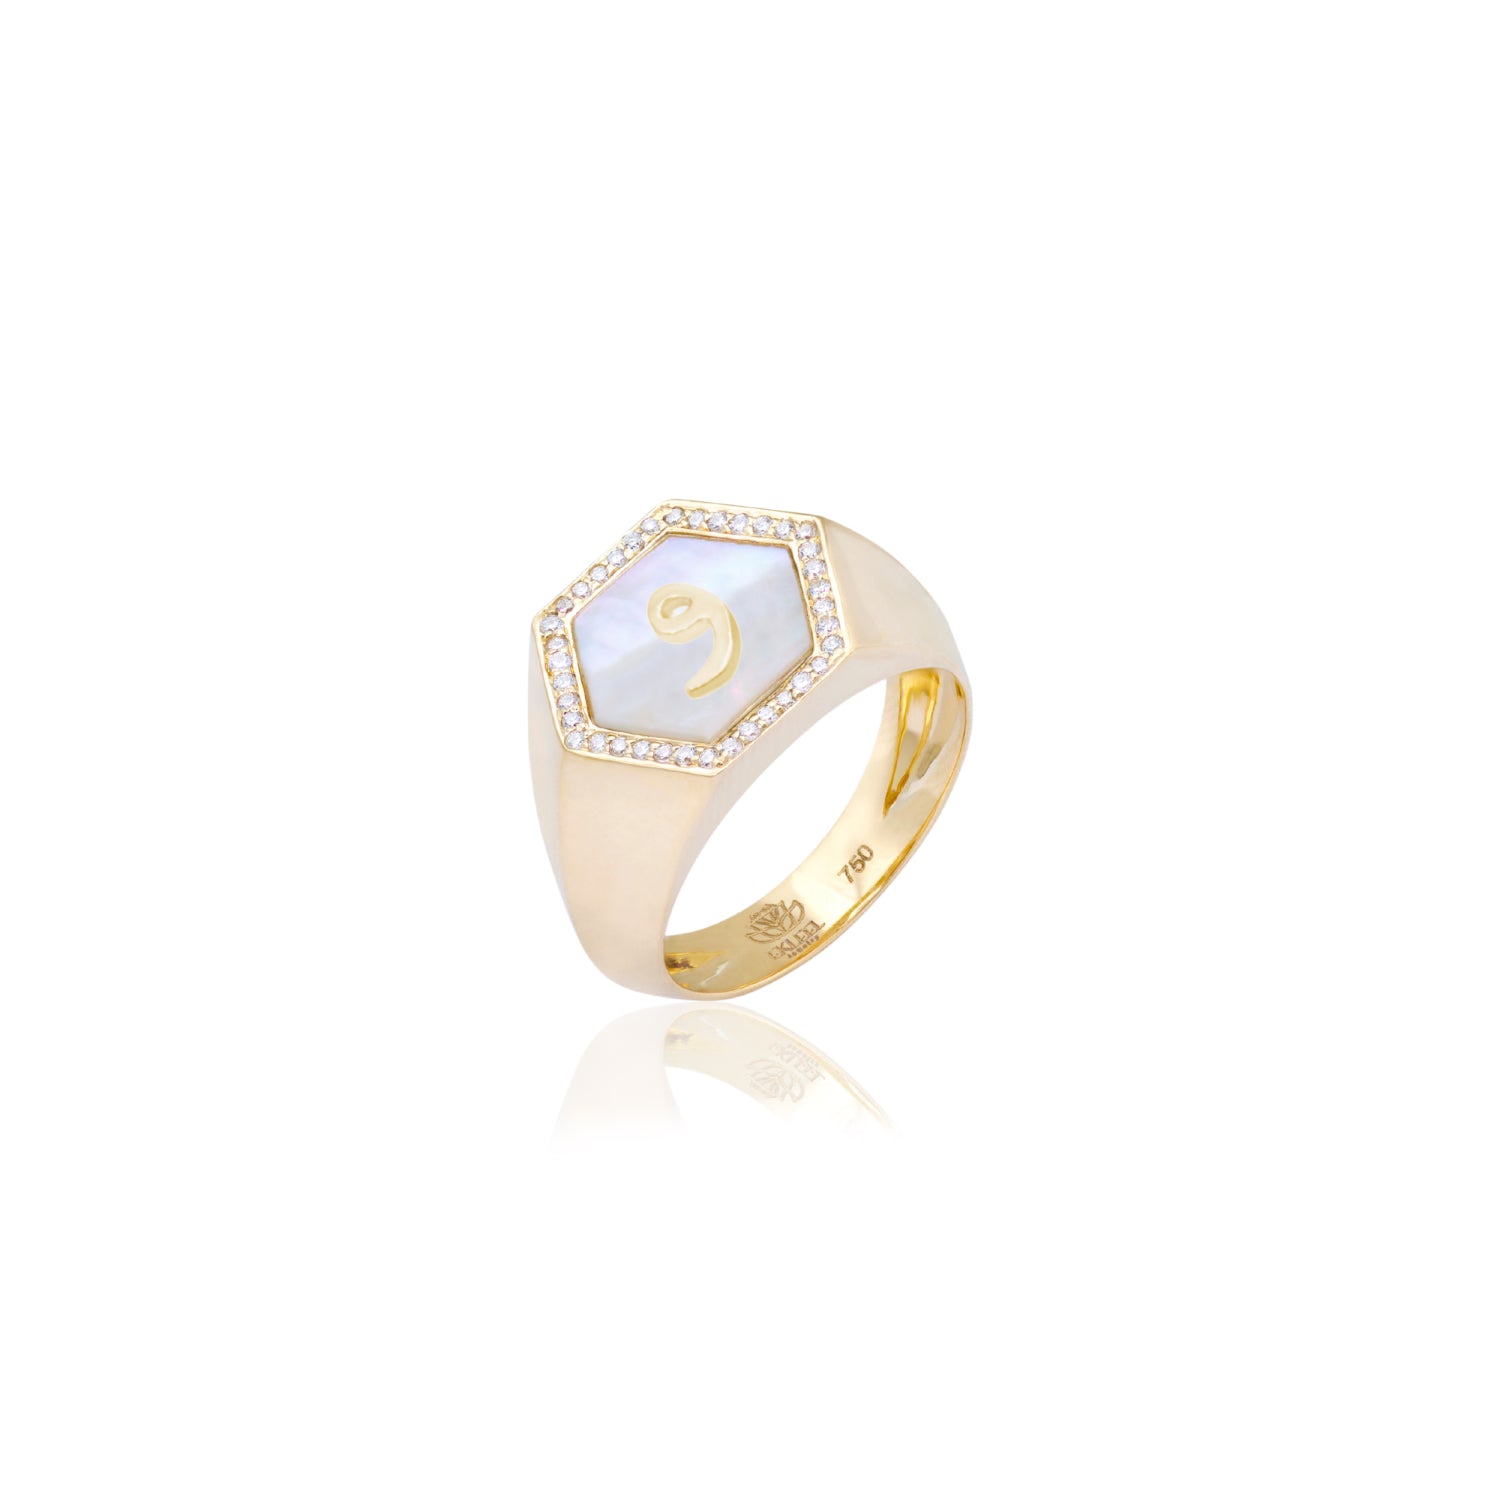 Qamoos 2.0 Letter و White Mother of Pearl and Diamond Signet Ring in Yellow Gold